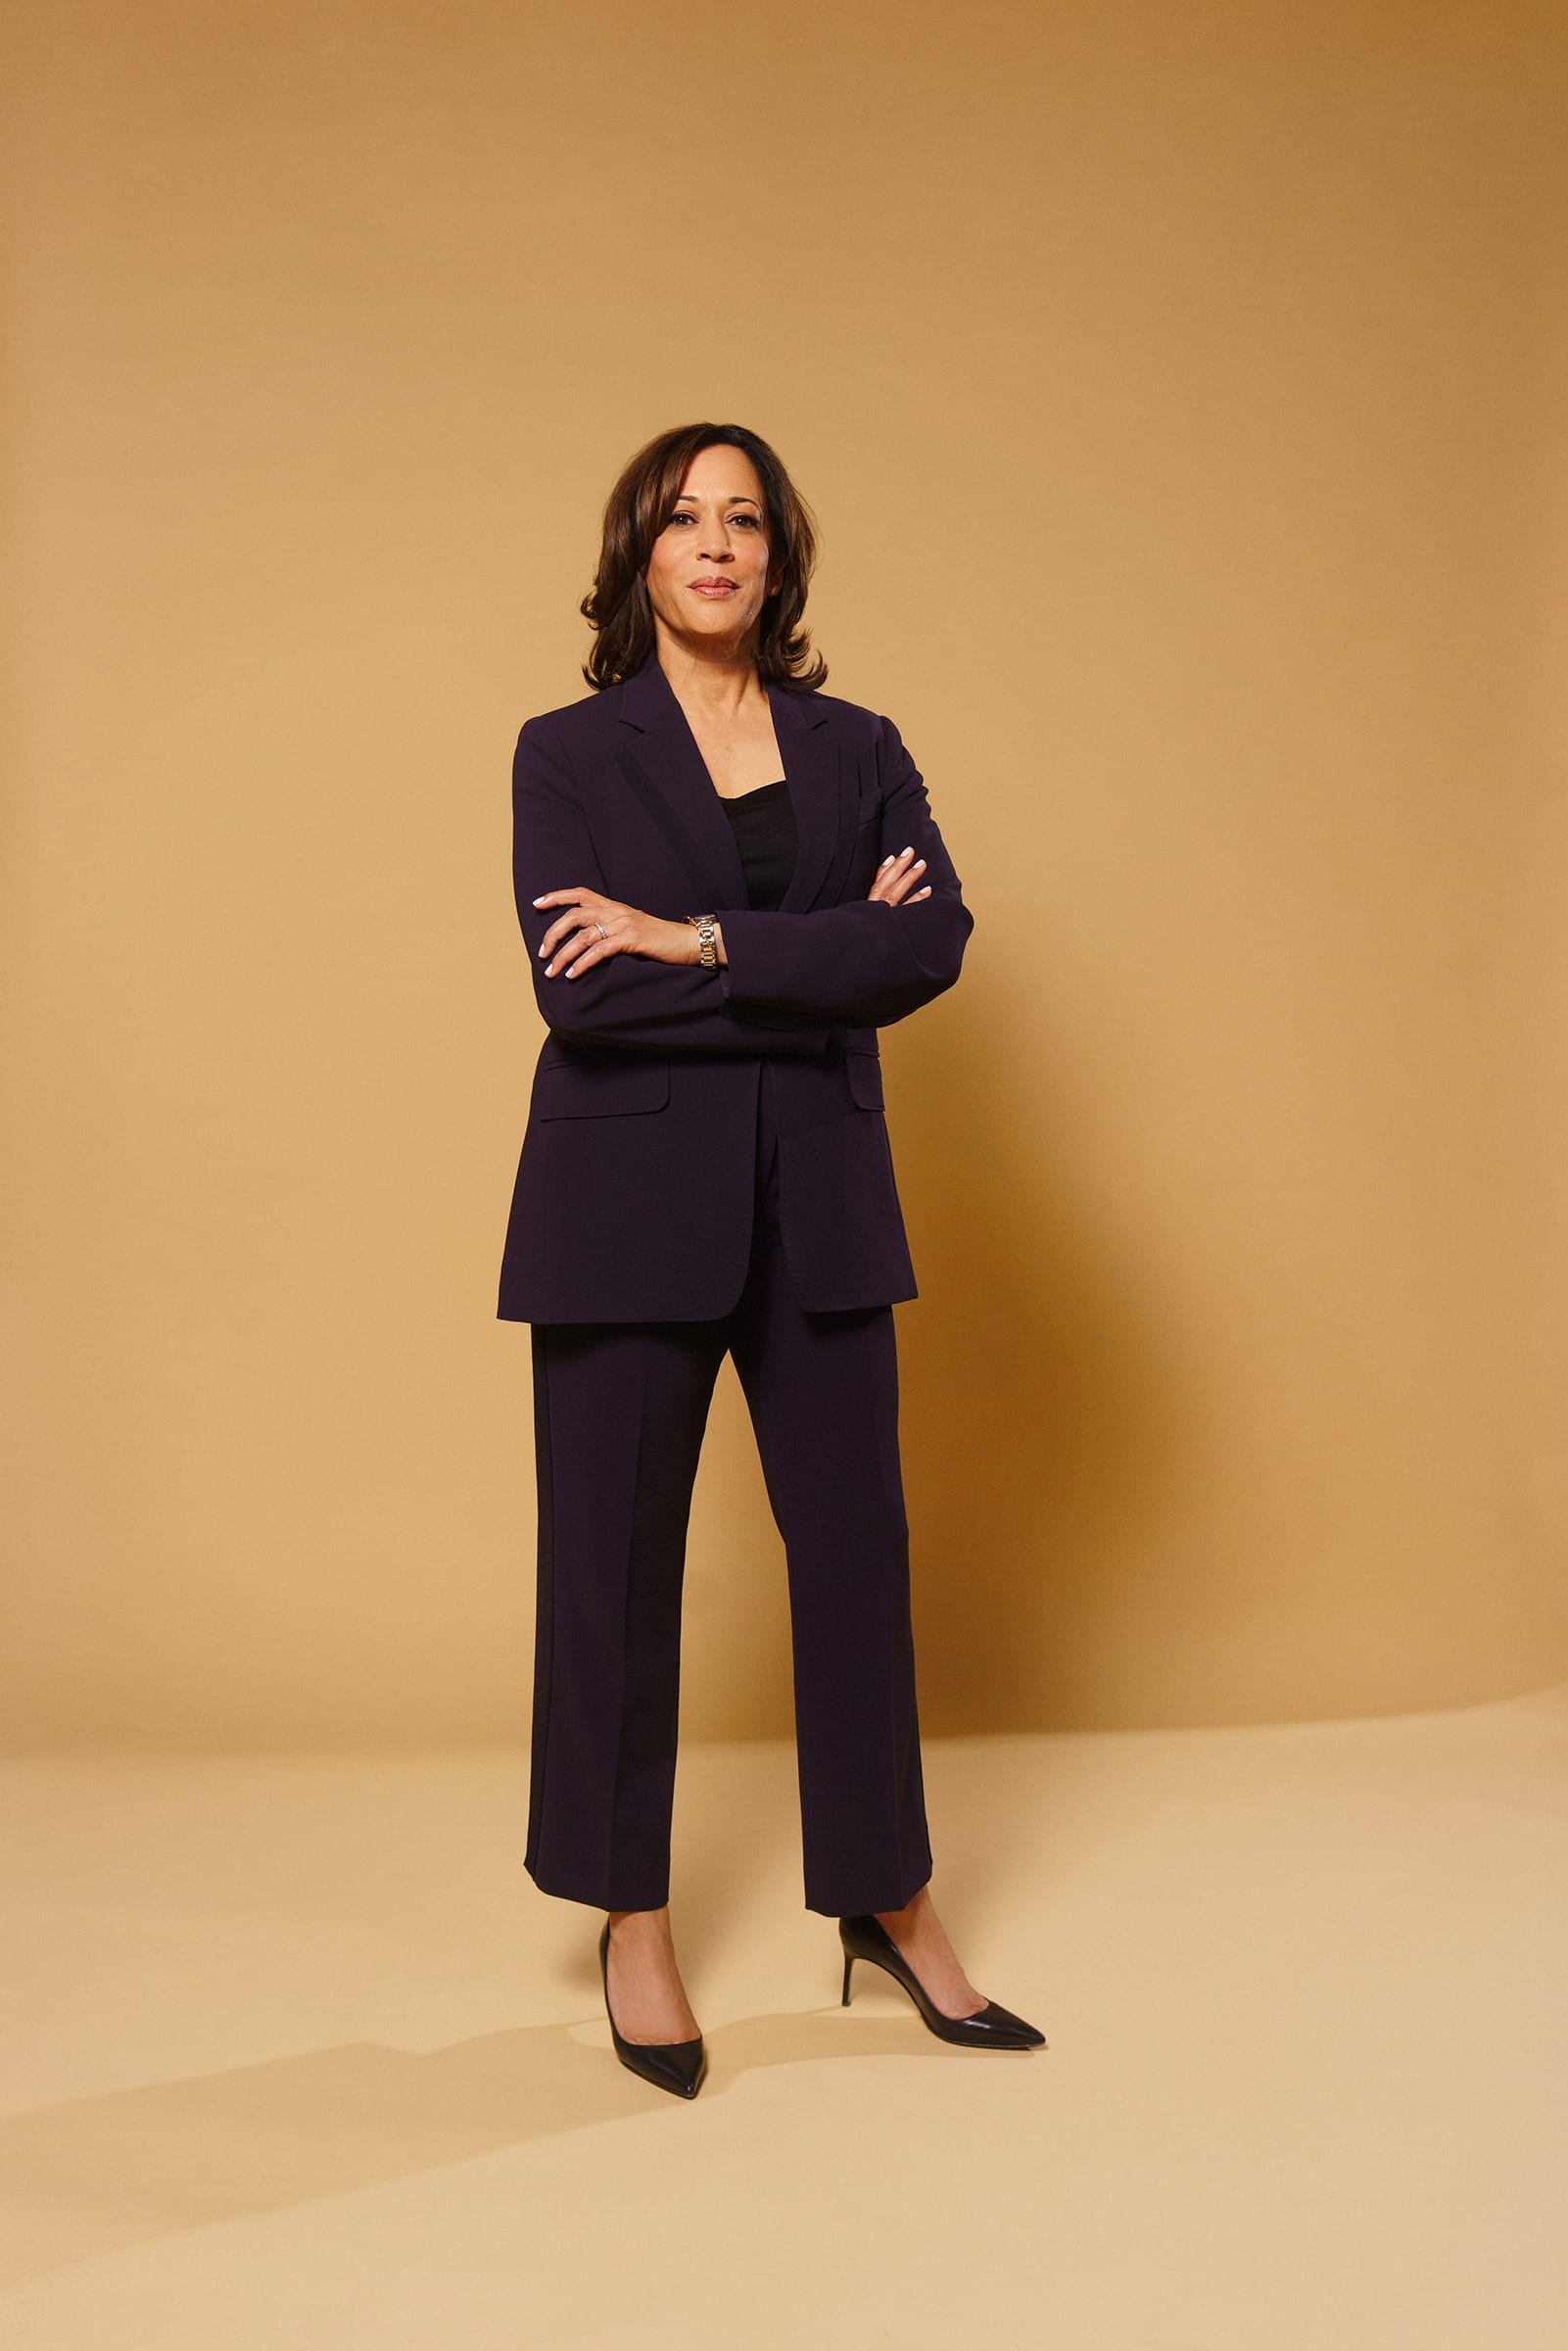 Kamala Harris, photographed in Los Angeles in October 2019.  TIME 100 Most Influential People,  Oct. 5 issue.